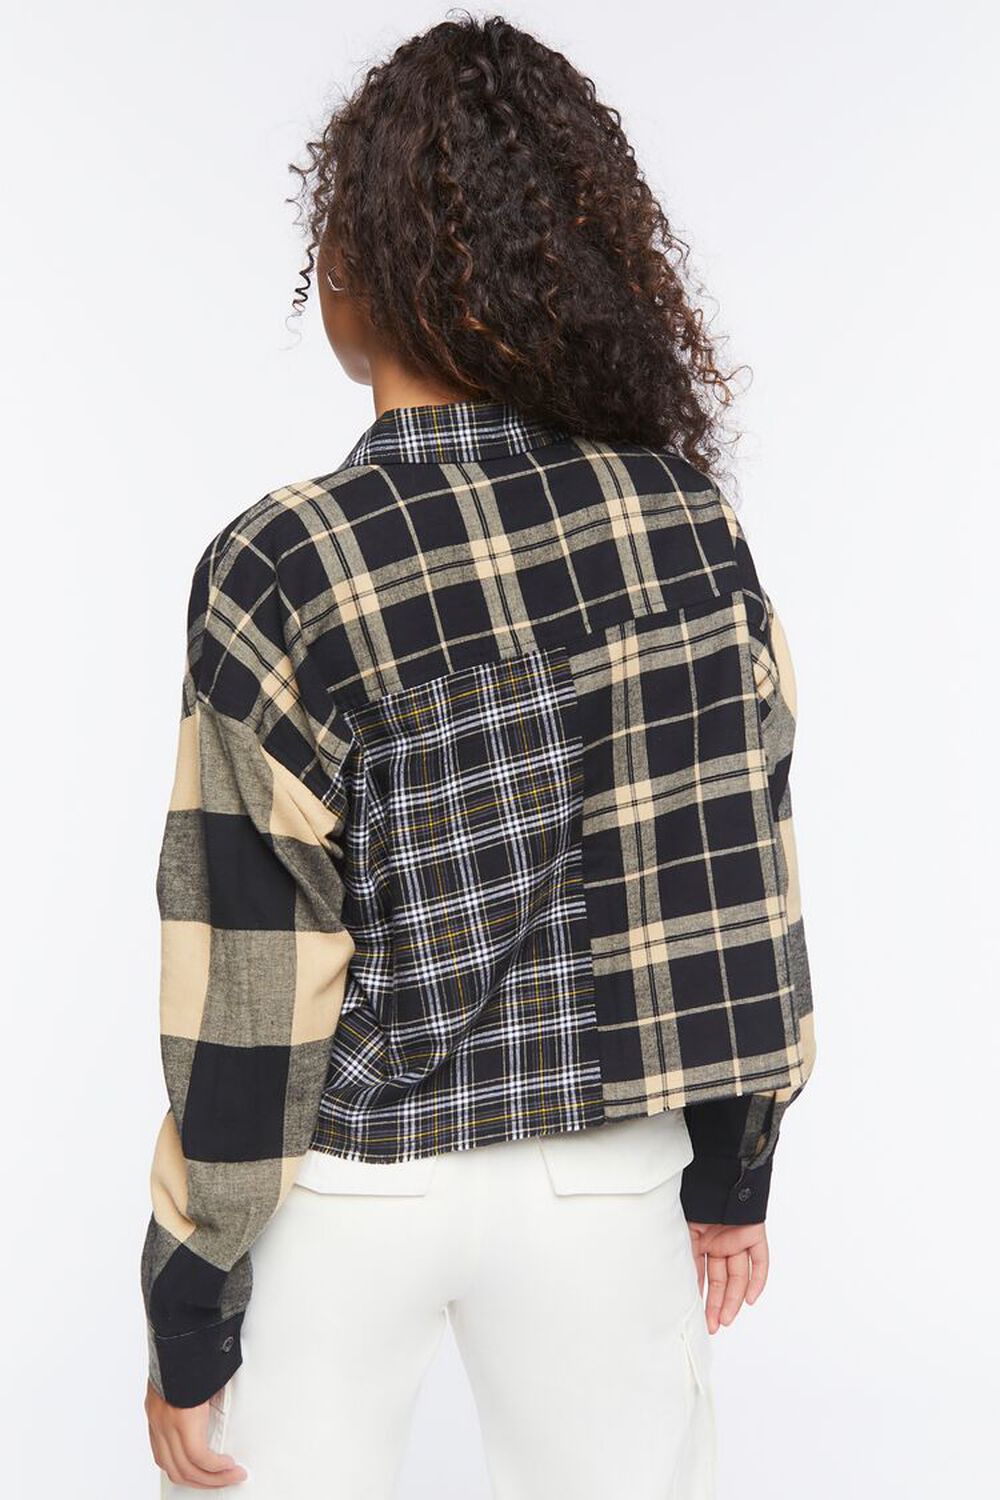 TAUPE/MULTI Reworked Mixed Plaid Flannel Shirt, image 3